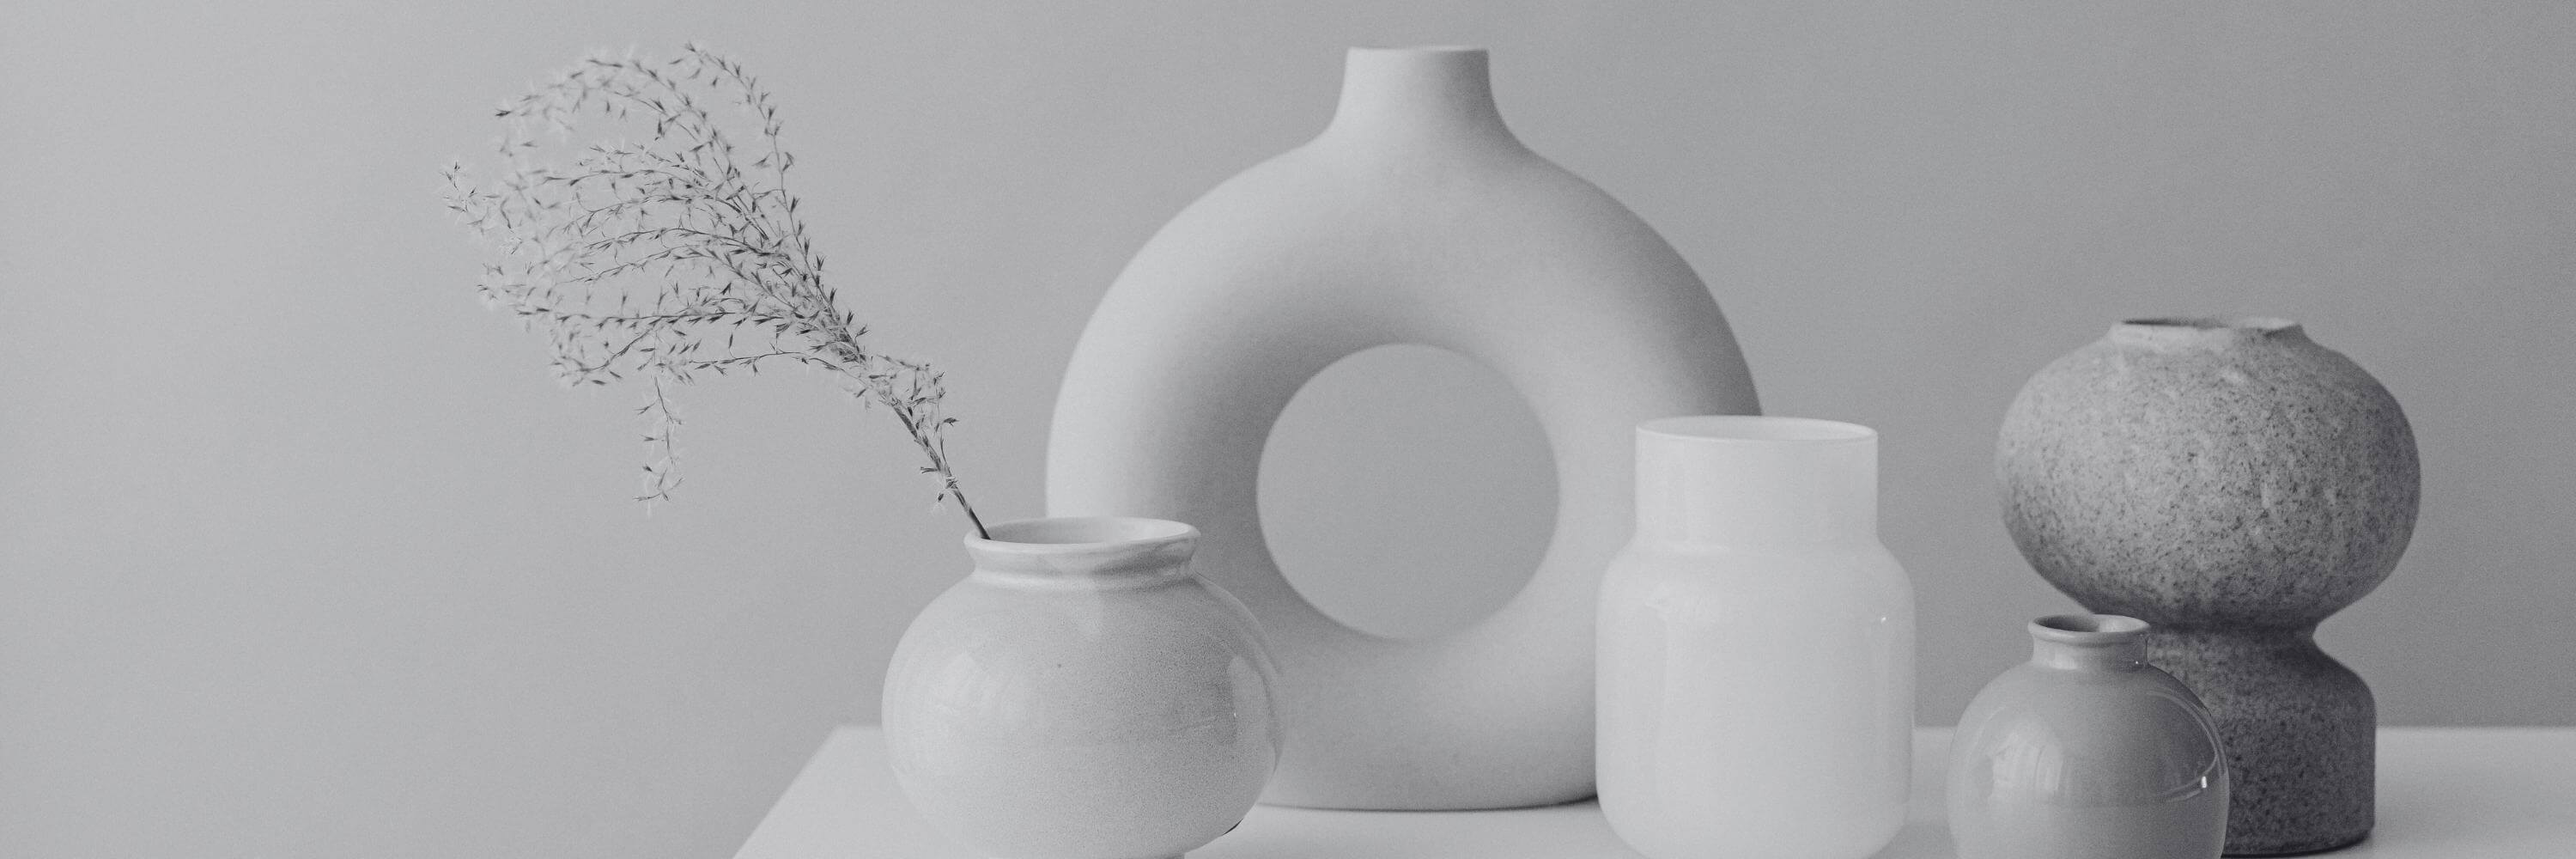 Set of minimal shaped vases in black and white